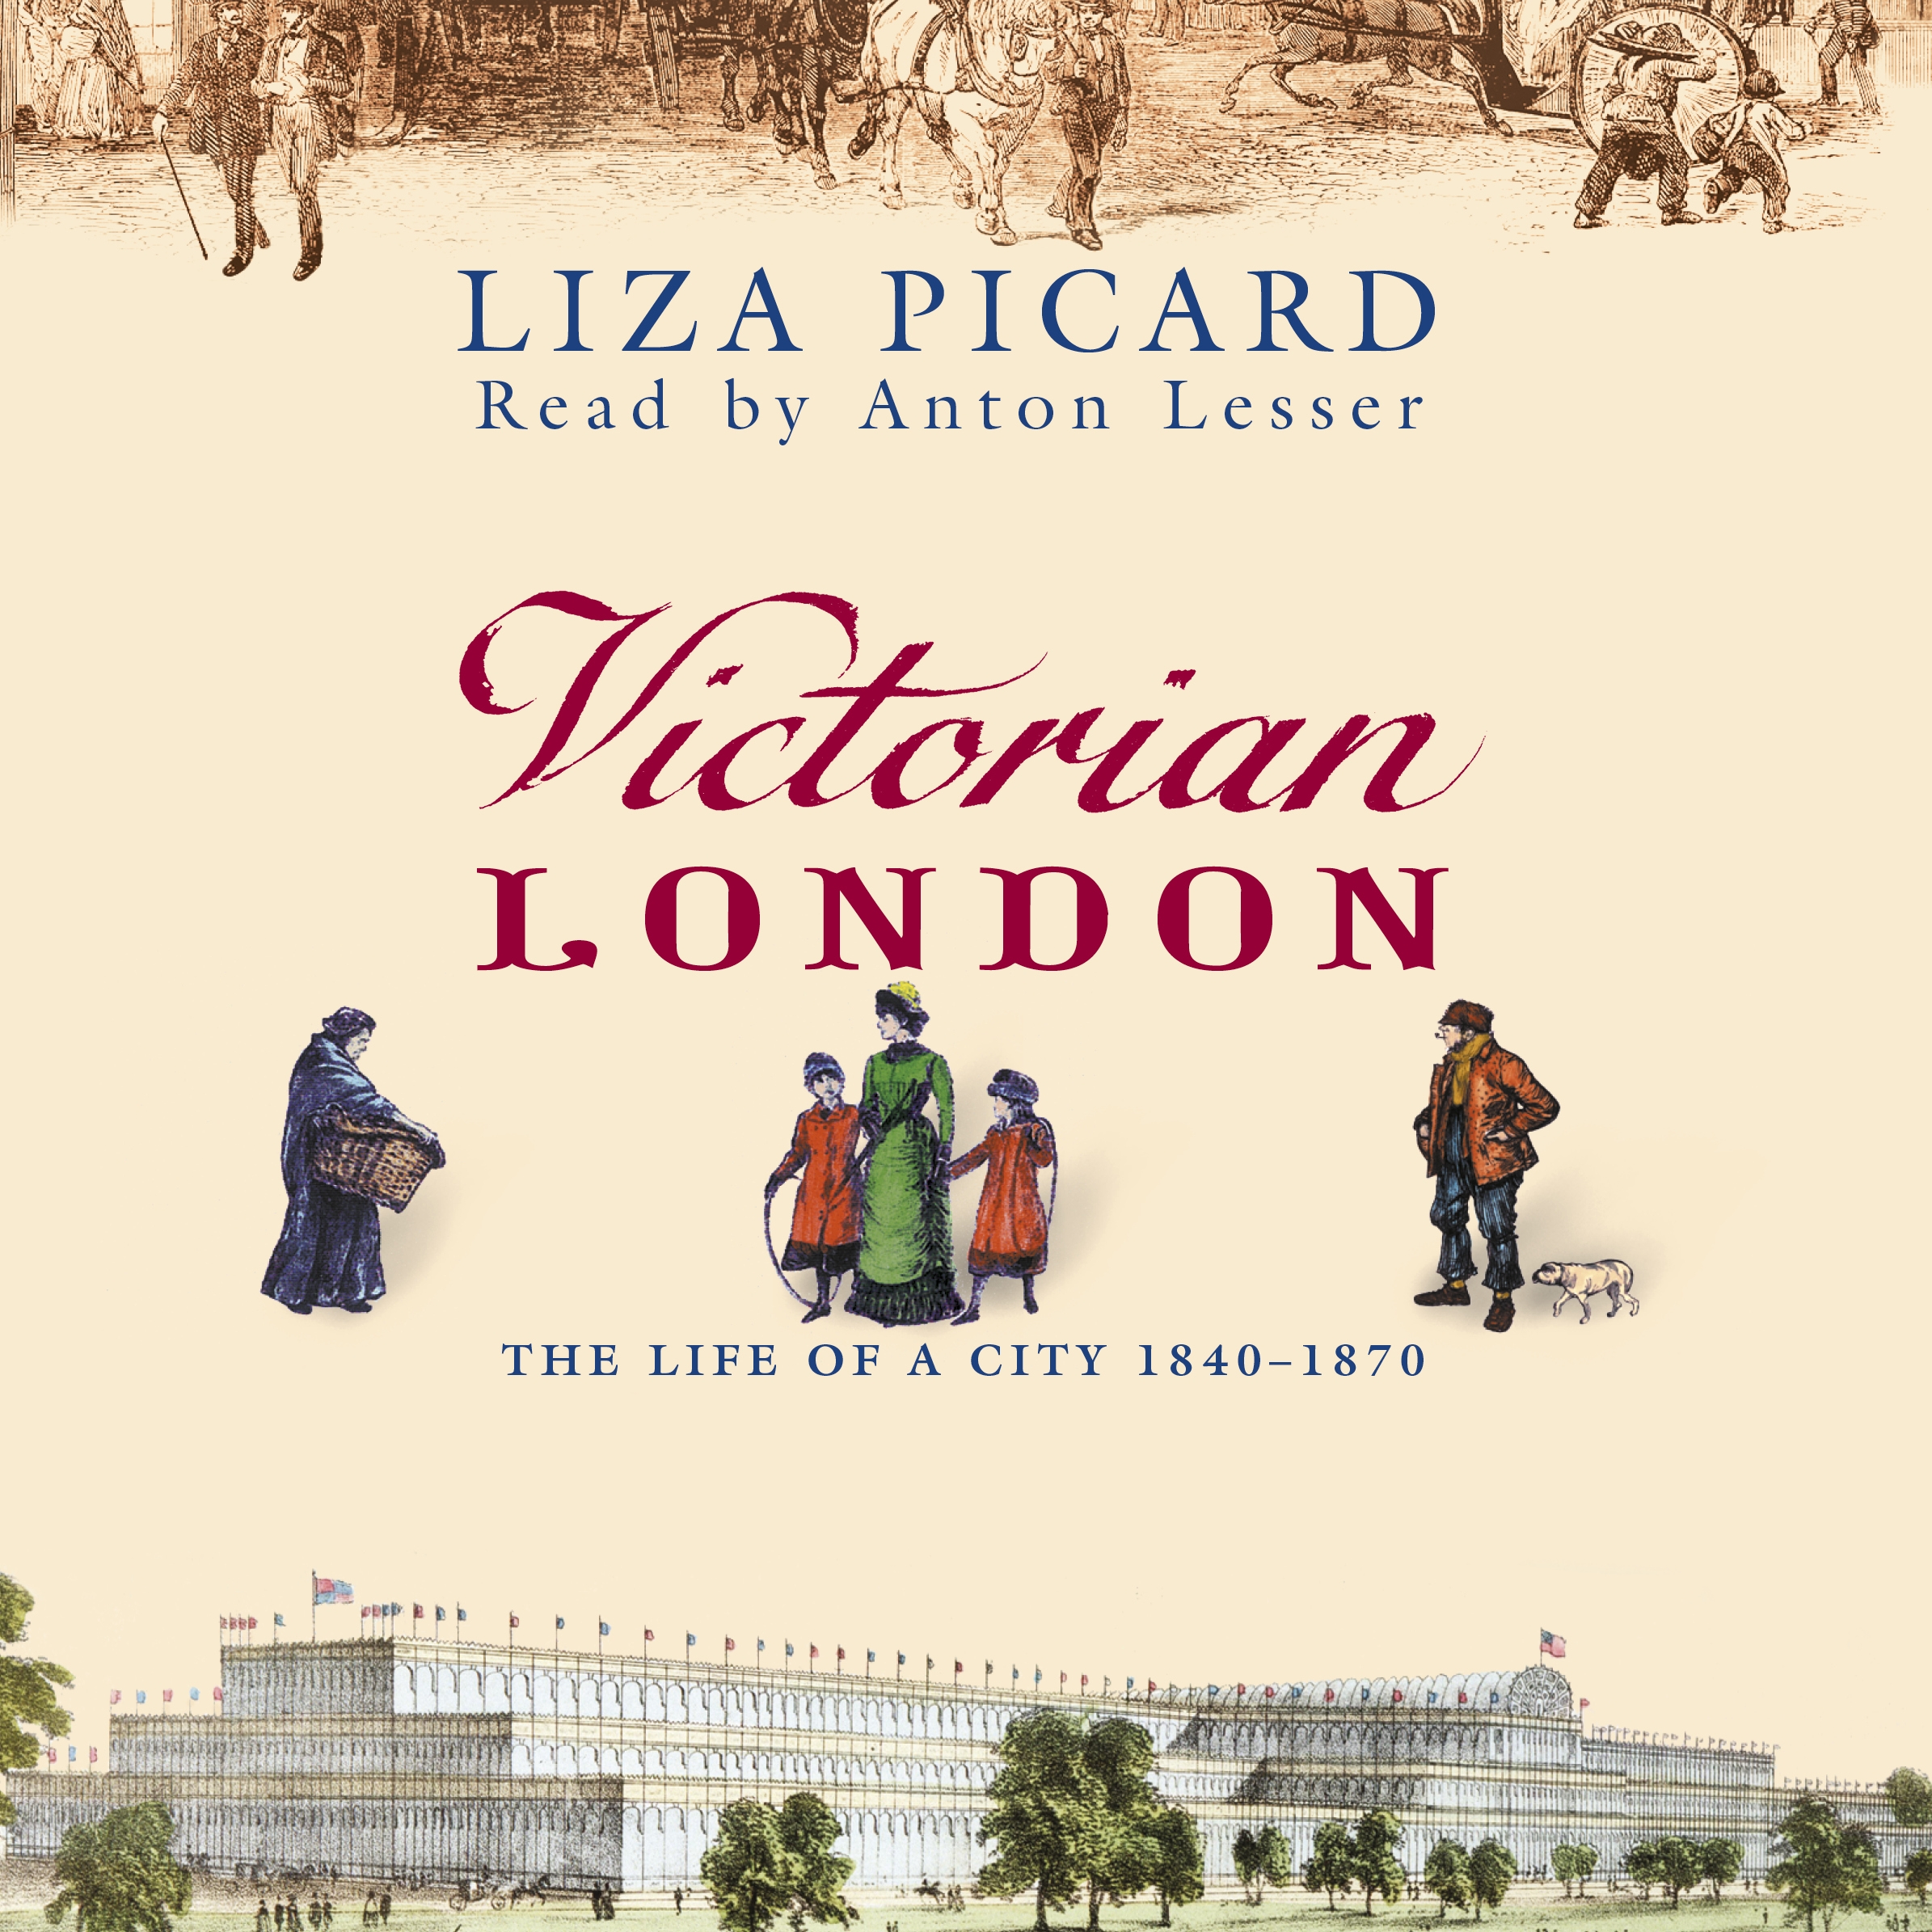 Victorian London by Liza Picard